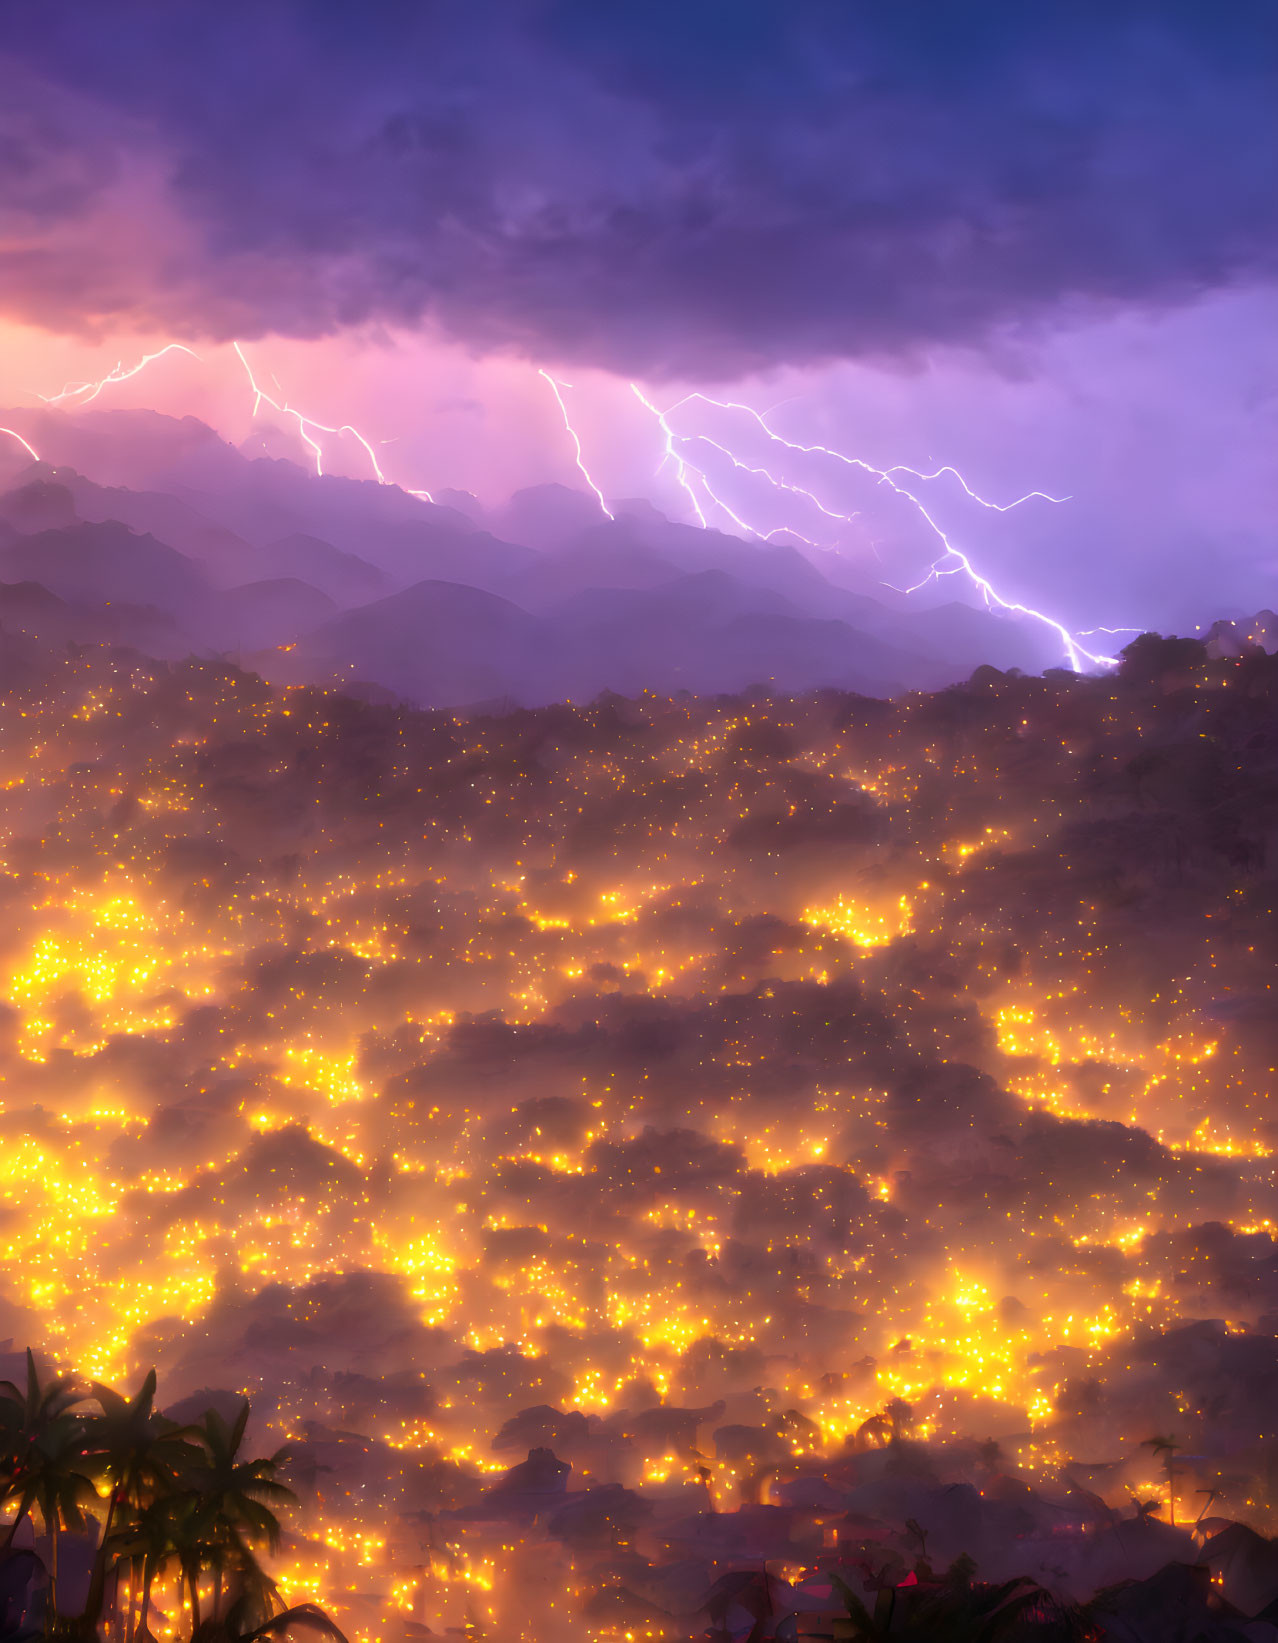 Purple Skies and Lightning Over Mountainous Cityscape at Night